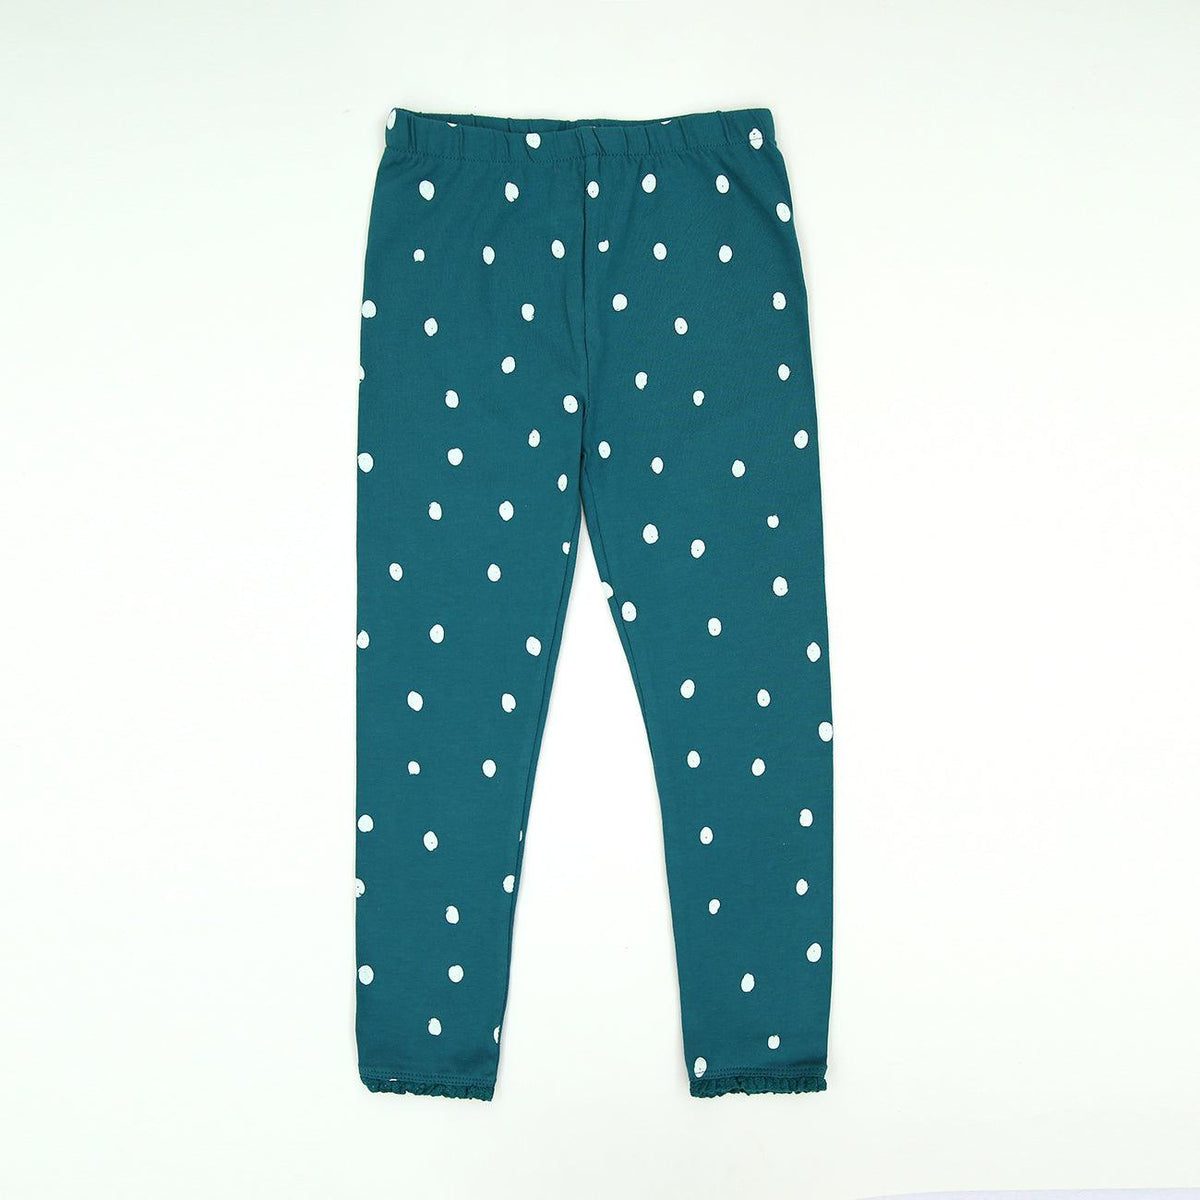 Imported All-Over Printed Soft Cotton Legging For Girls 1.5-2 YRS - 6-7 YRS (LE-11552) - Brands River